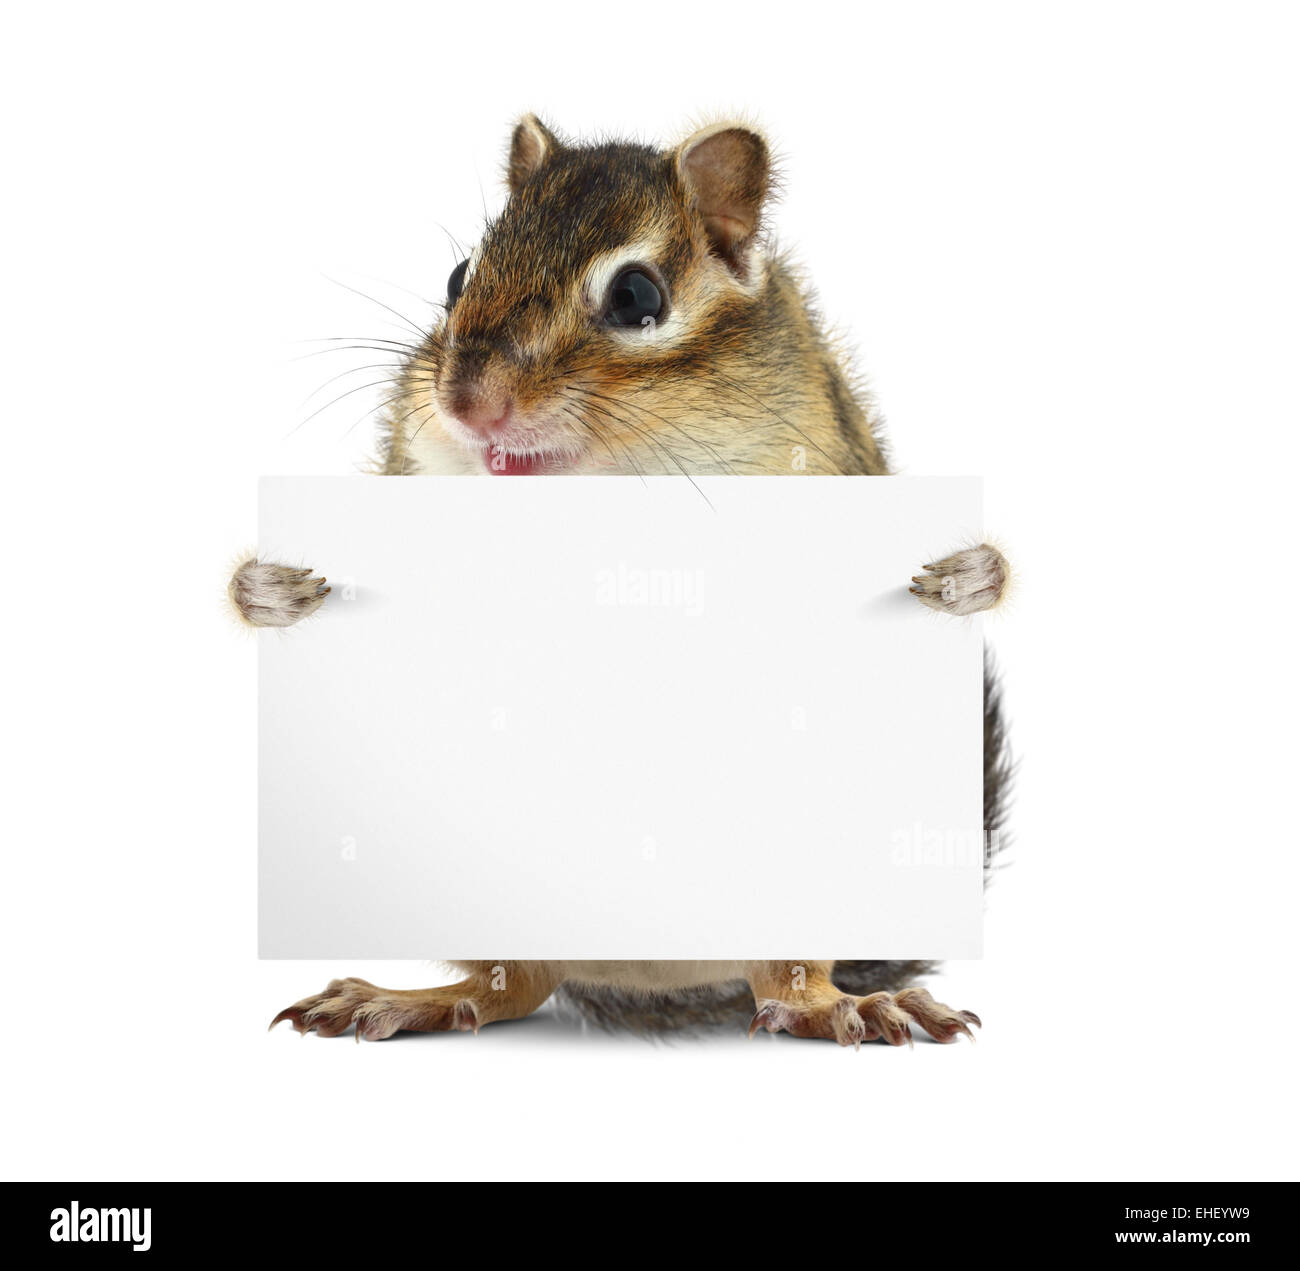 Funny chipmunk hold banner on white background Stock Photo